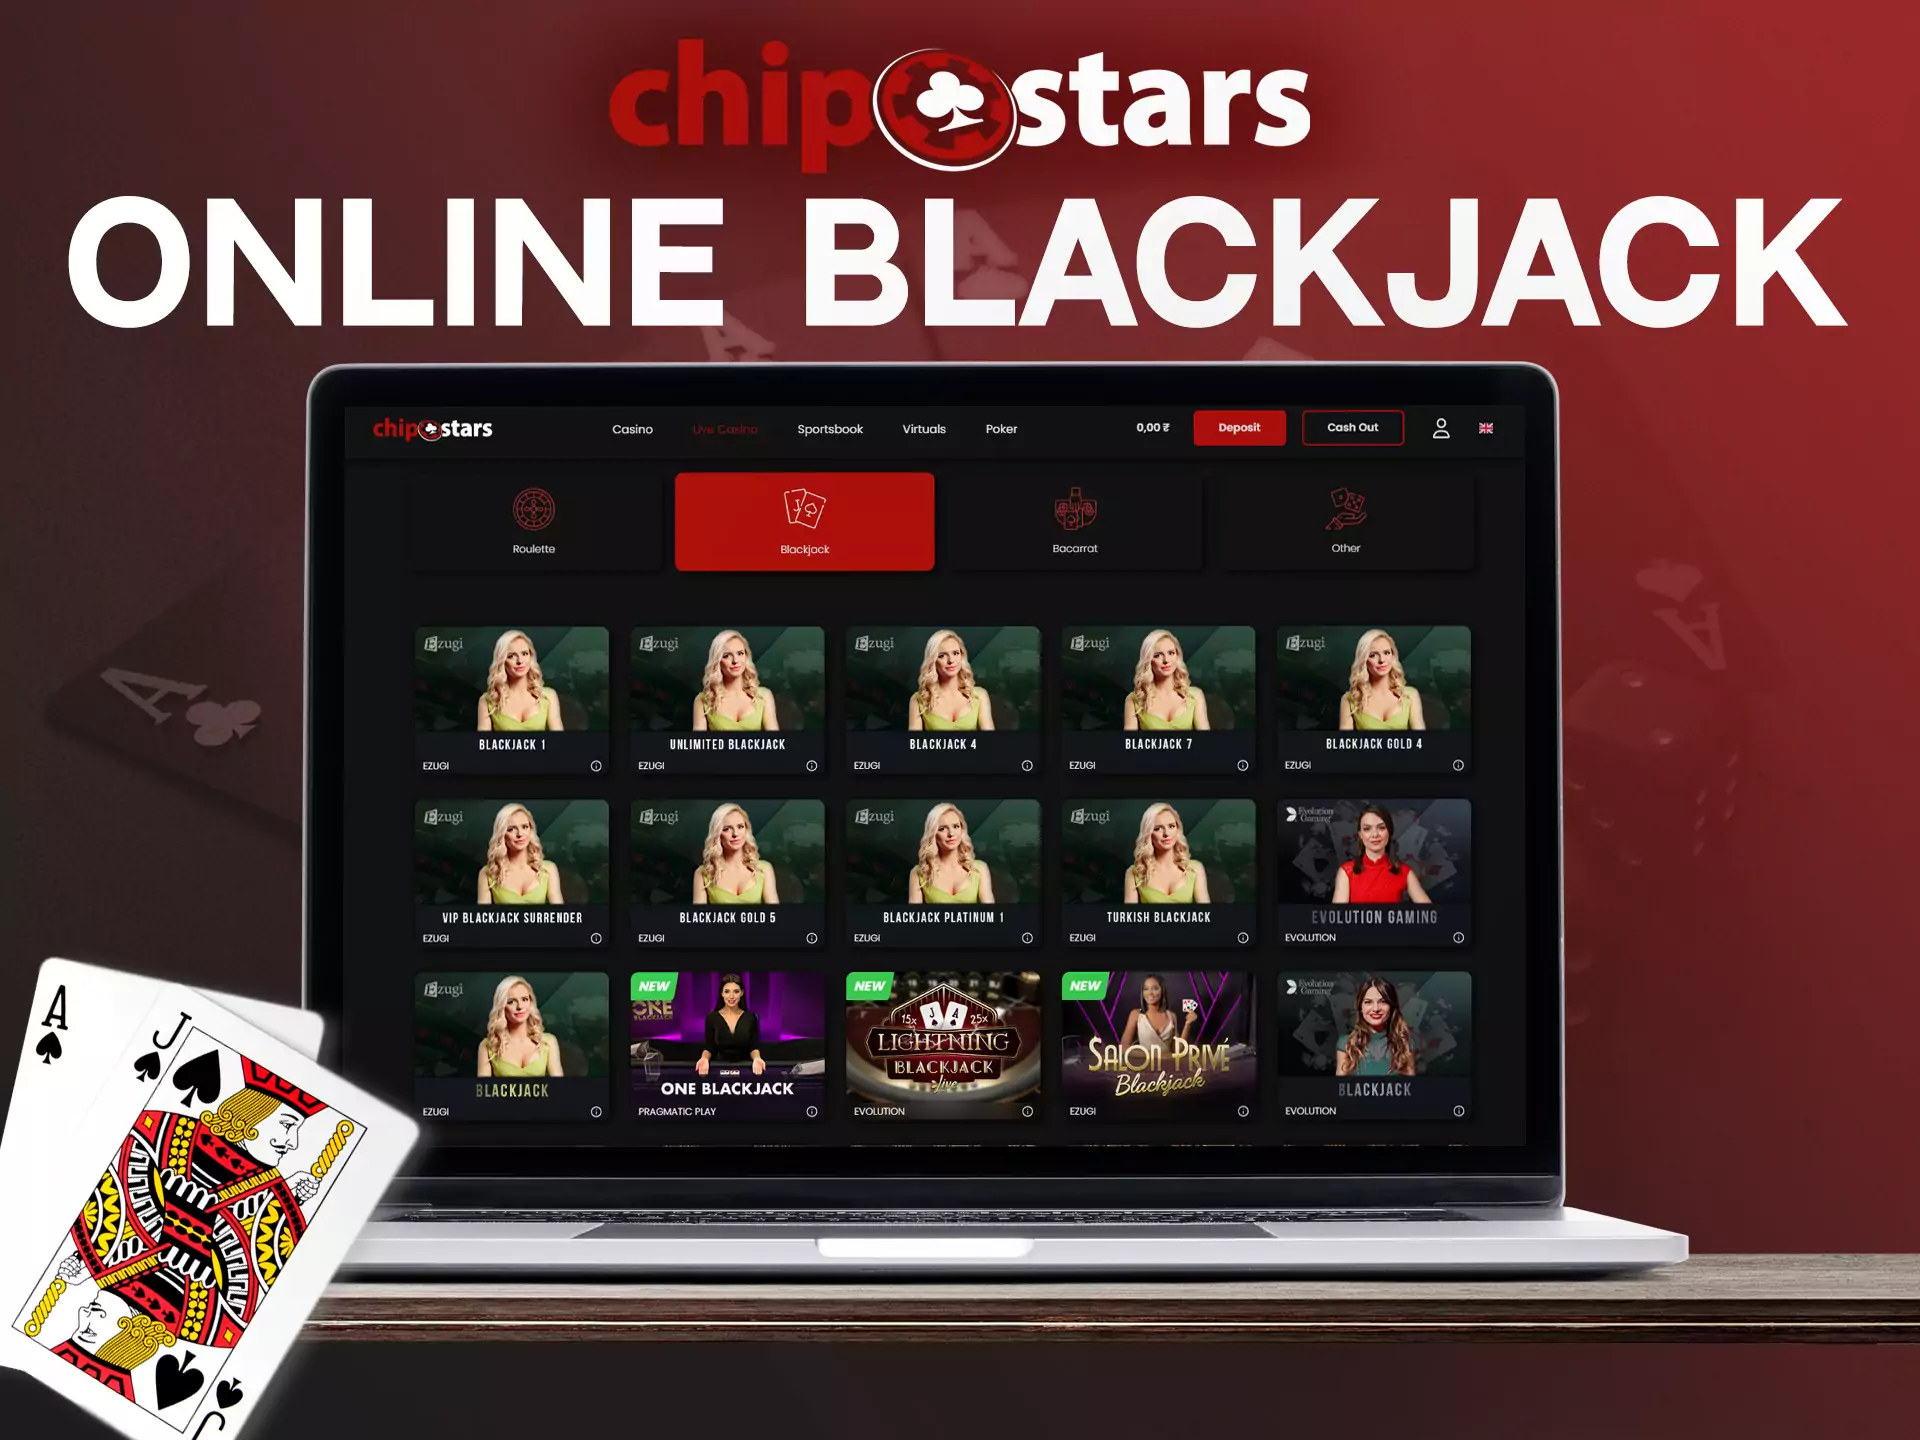 You can play the game of blackjack in the Chipstars Casino.